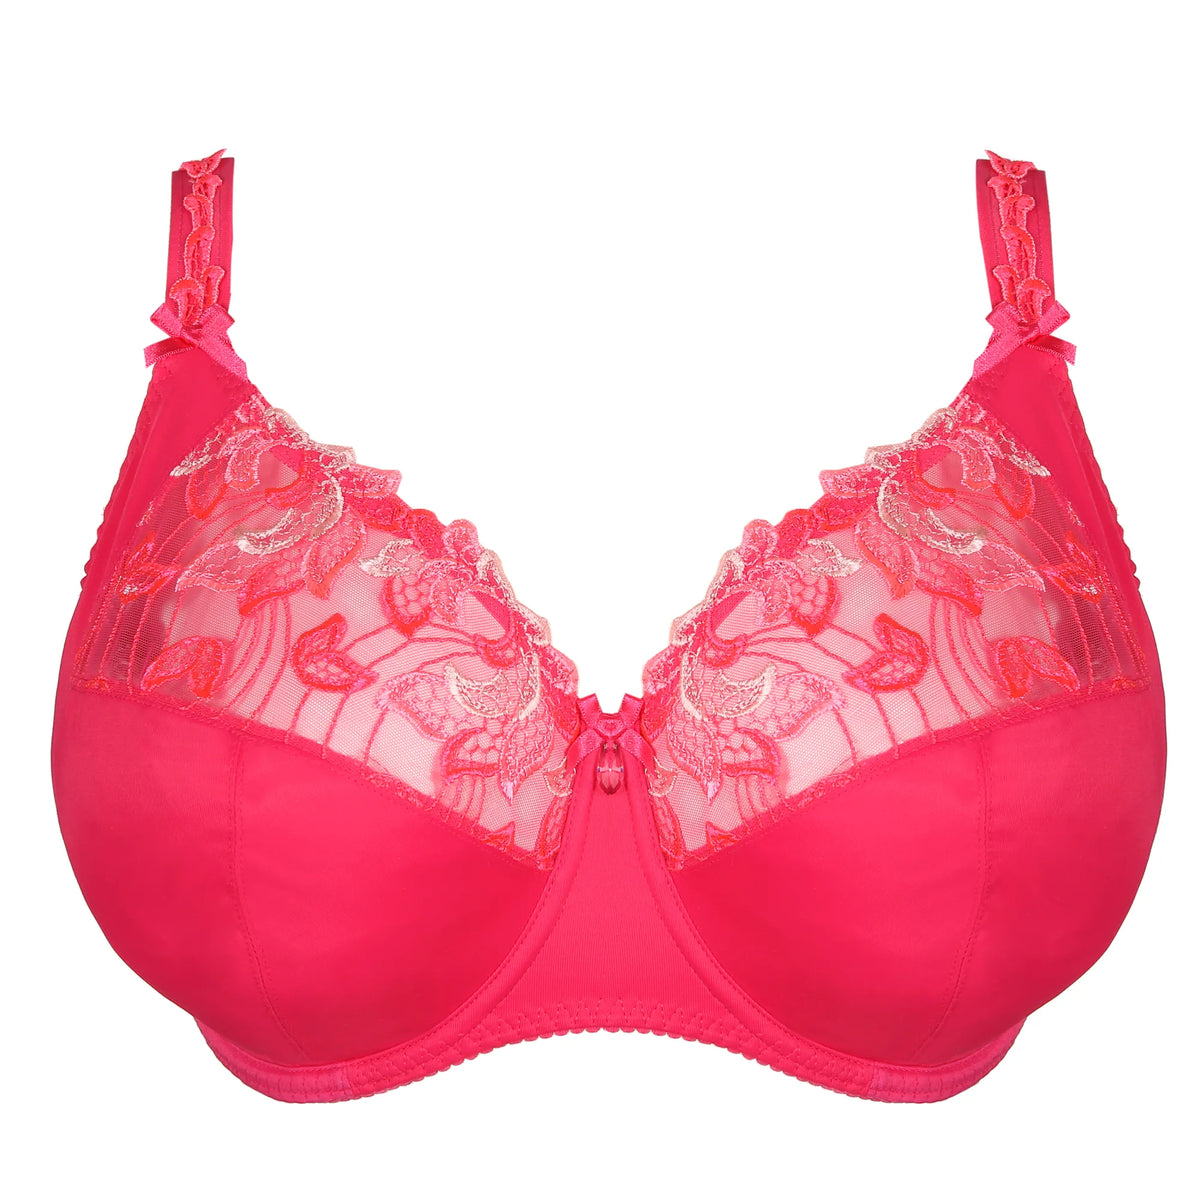 FREE - CHECK DESCRIPTION!! pink floral 34A bra Size undefined - $4 - From  megan